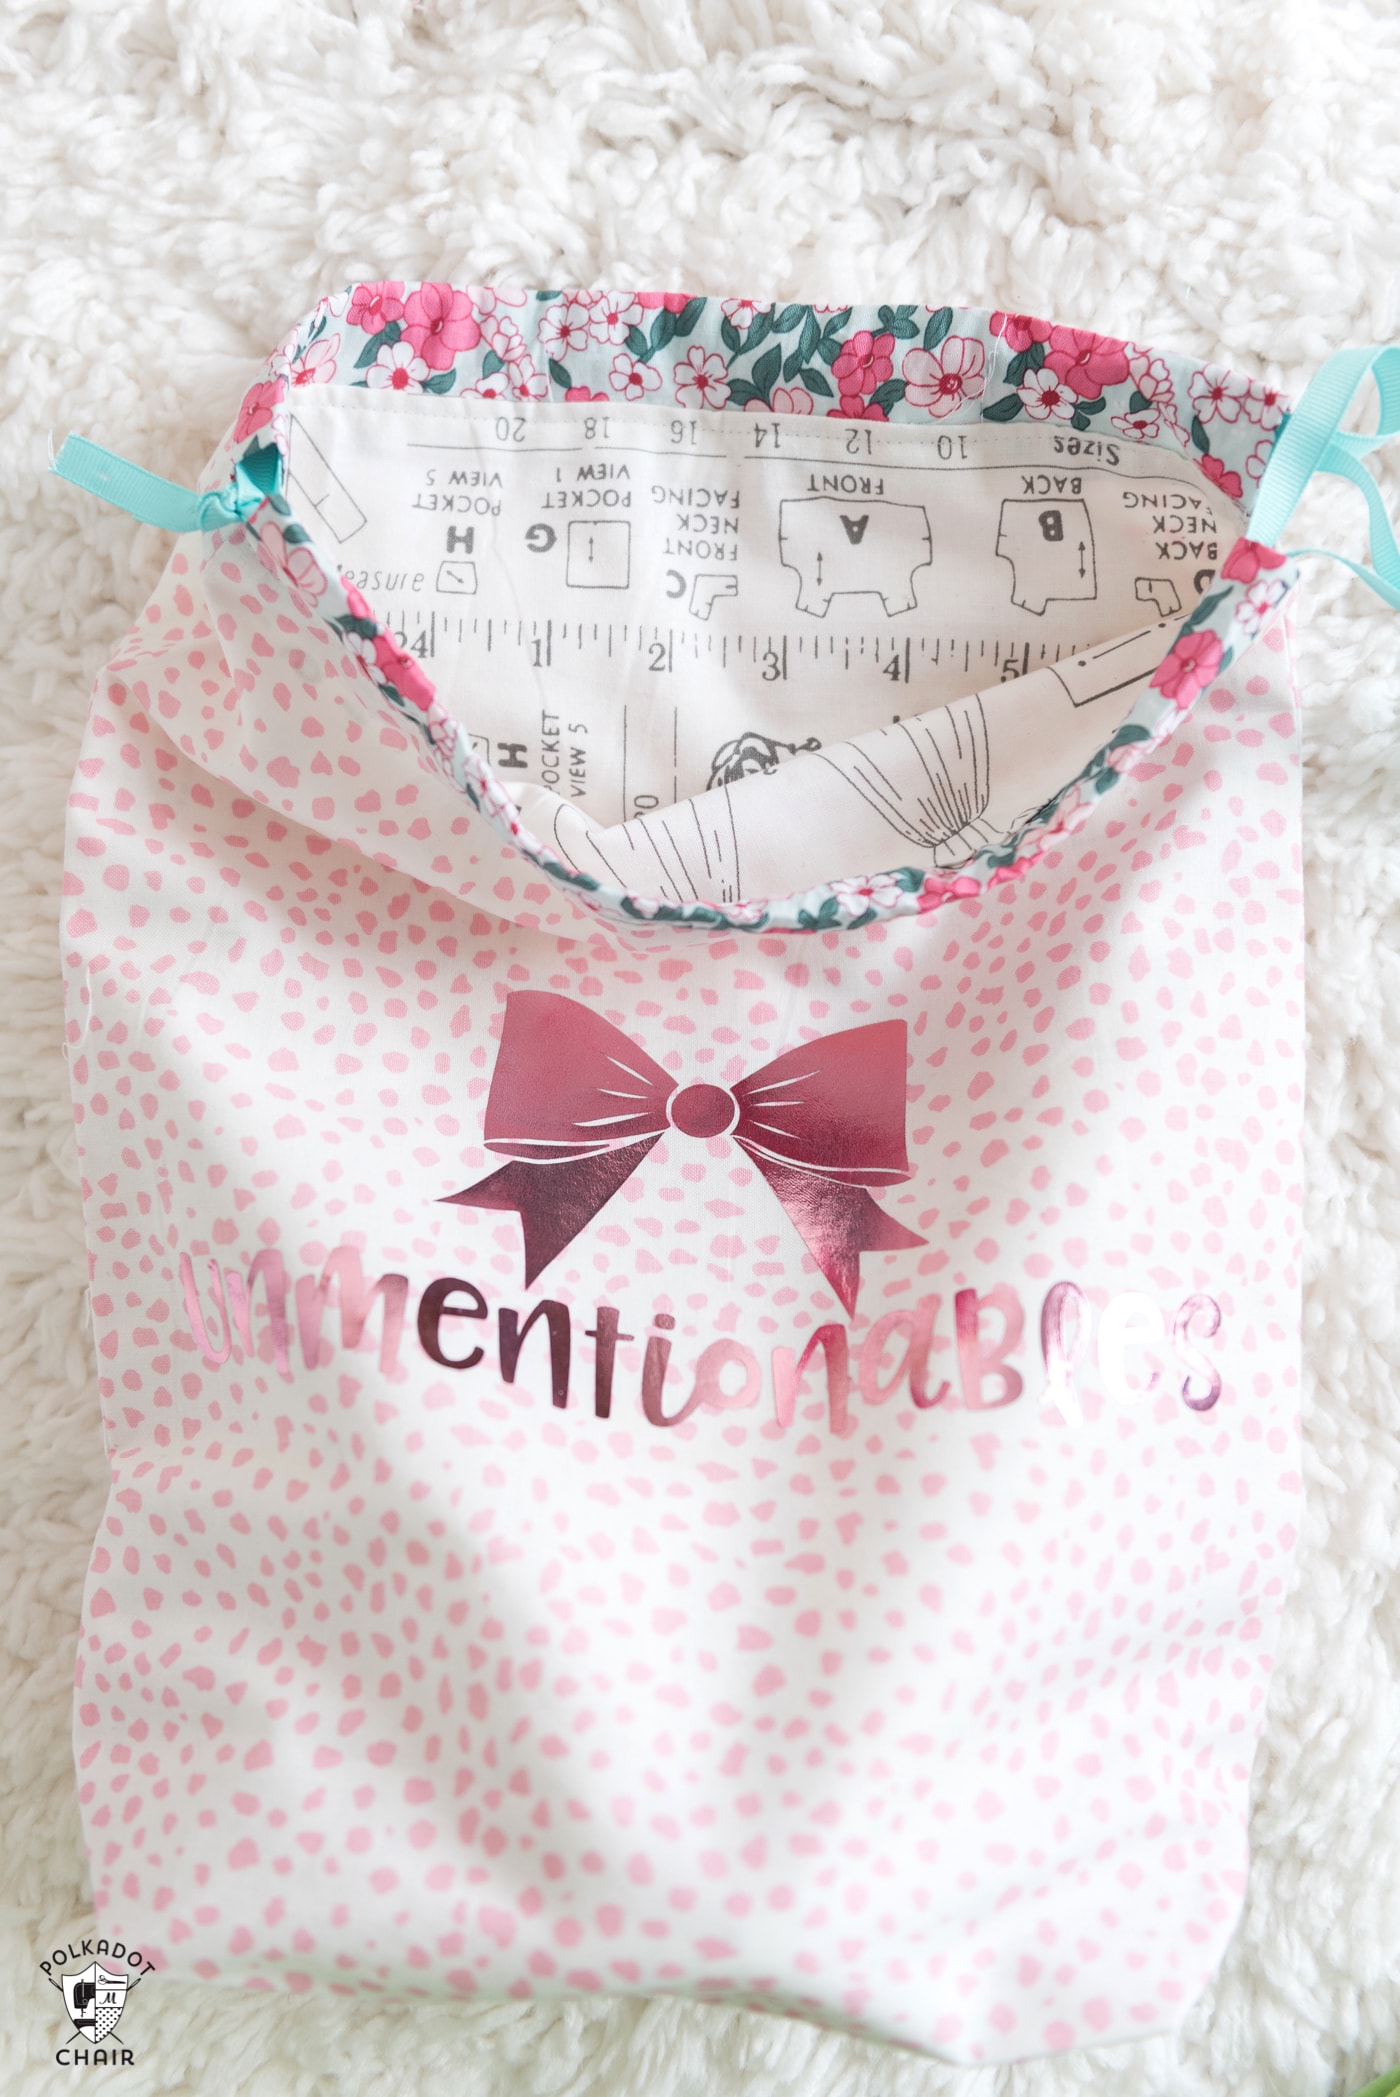 Free tutorial and Lined Drawstring Bag Sewing Pattern - how to sew a reversible drawstring bag and add cute sayings to the front! Includes free cricut cut file downloads #sewing #sewingpattern #drawstringbag #laundrybag #cricut #cricutmade #ad